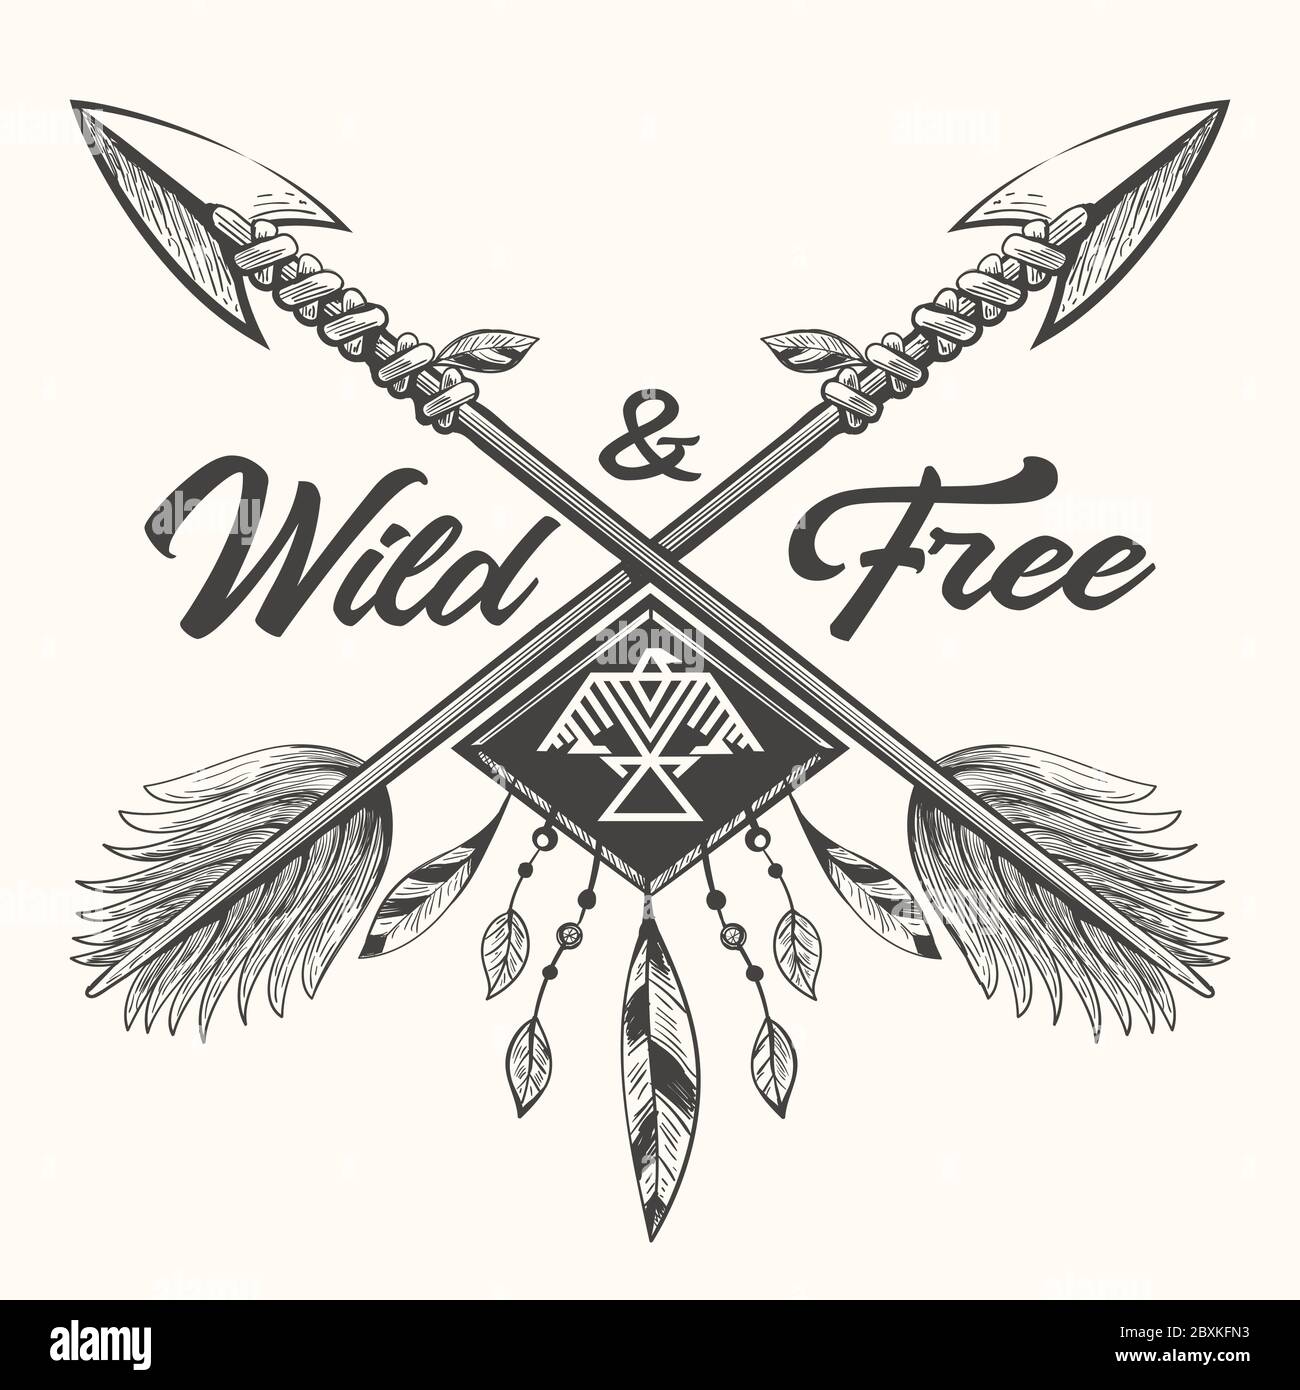 Hand drawn tribal label with crossed arrows, feathers and letteringv Free and Wild. Vector illustration. Stock Vector